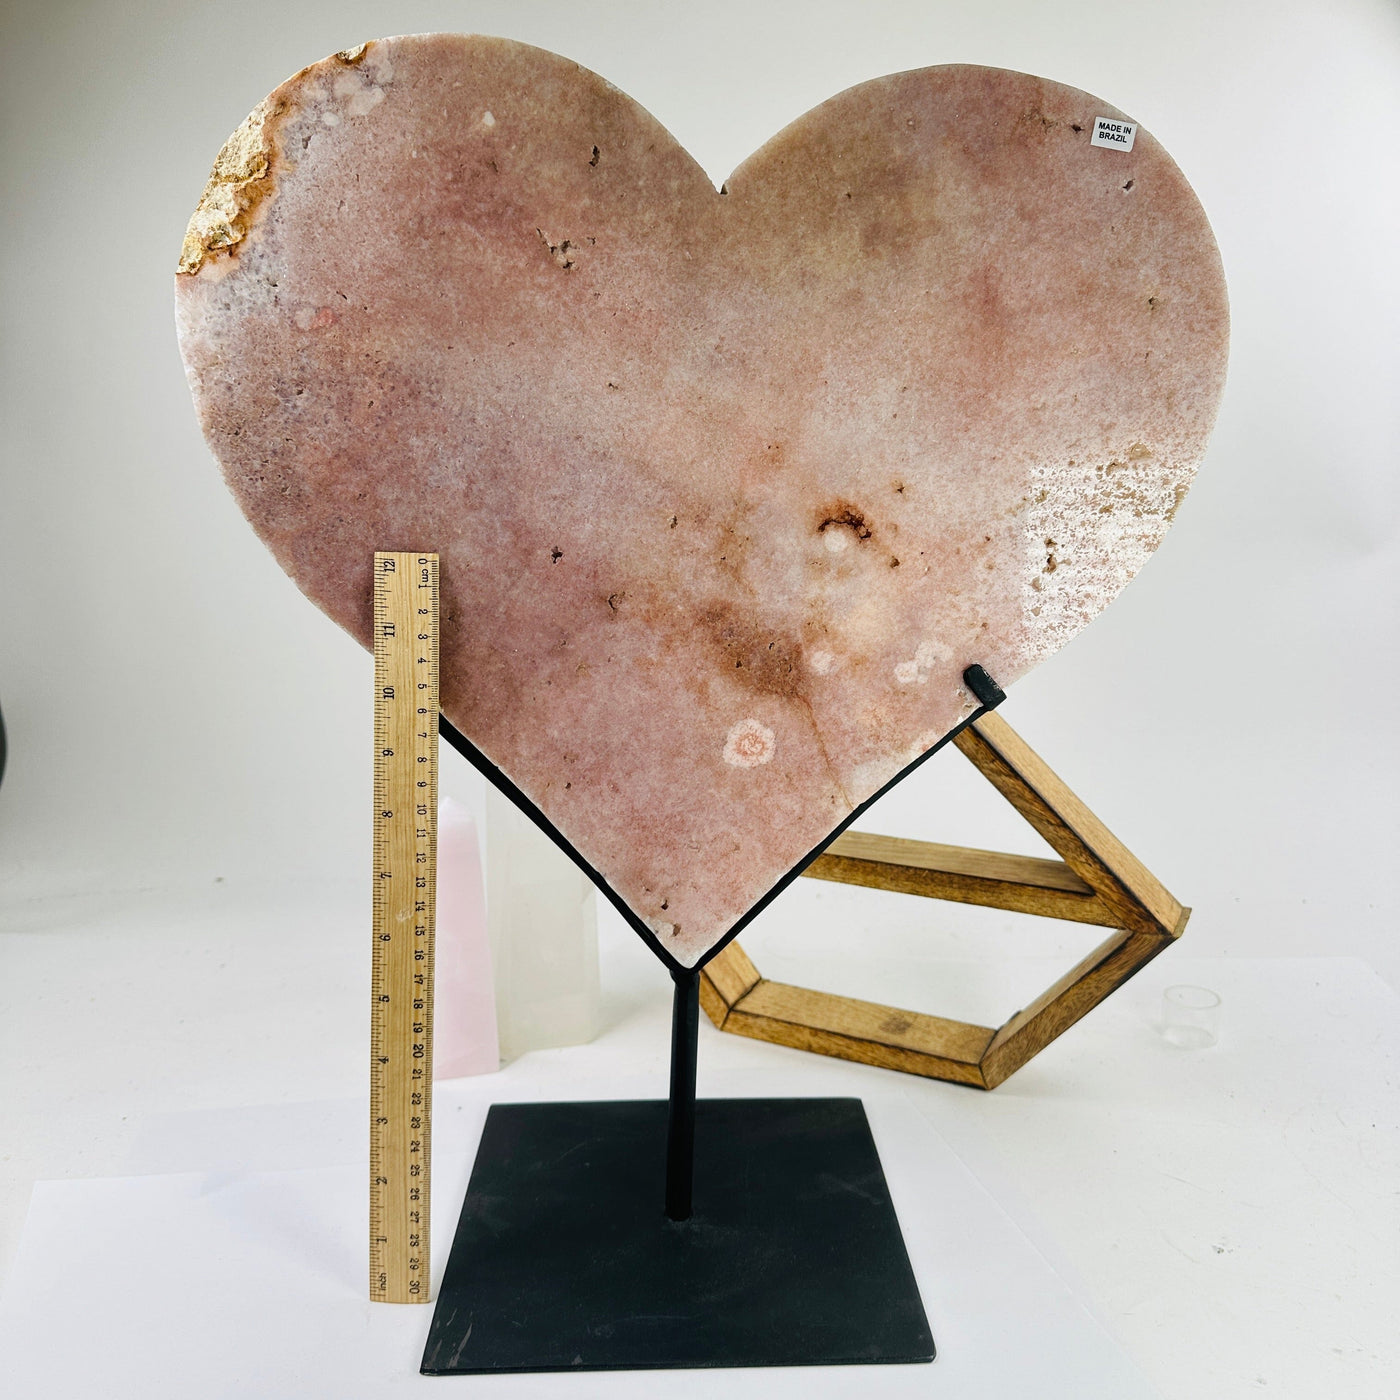 pink amethyst hearts next to a ruler for size reference